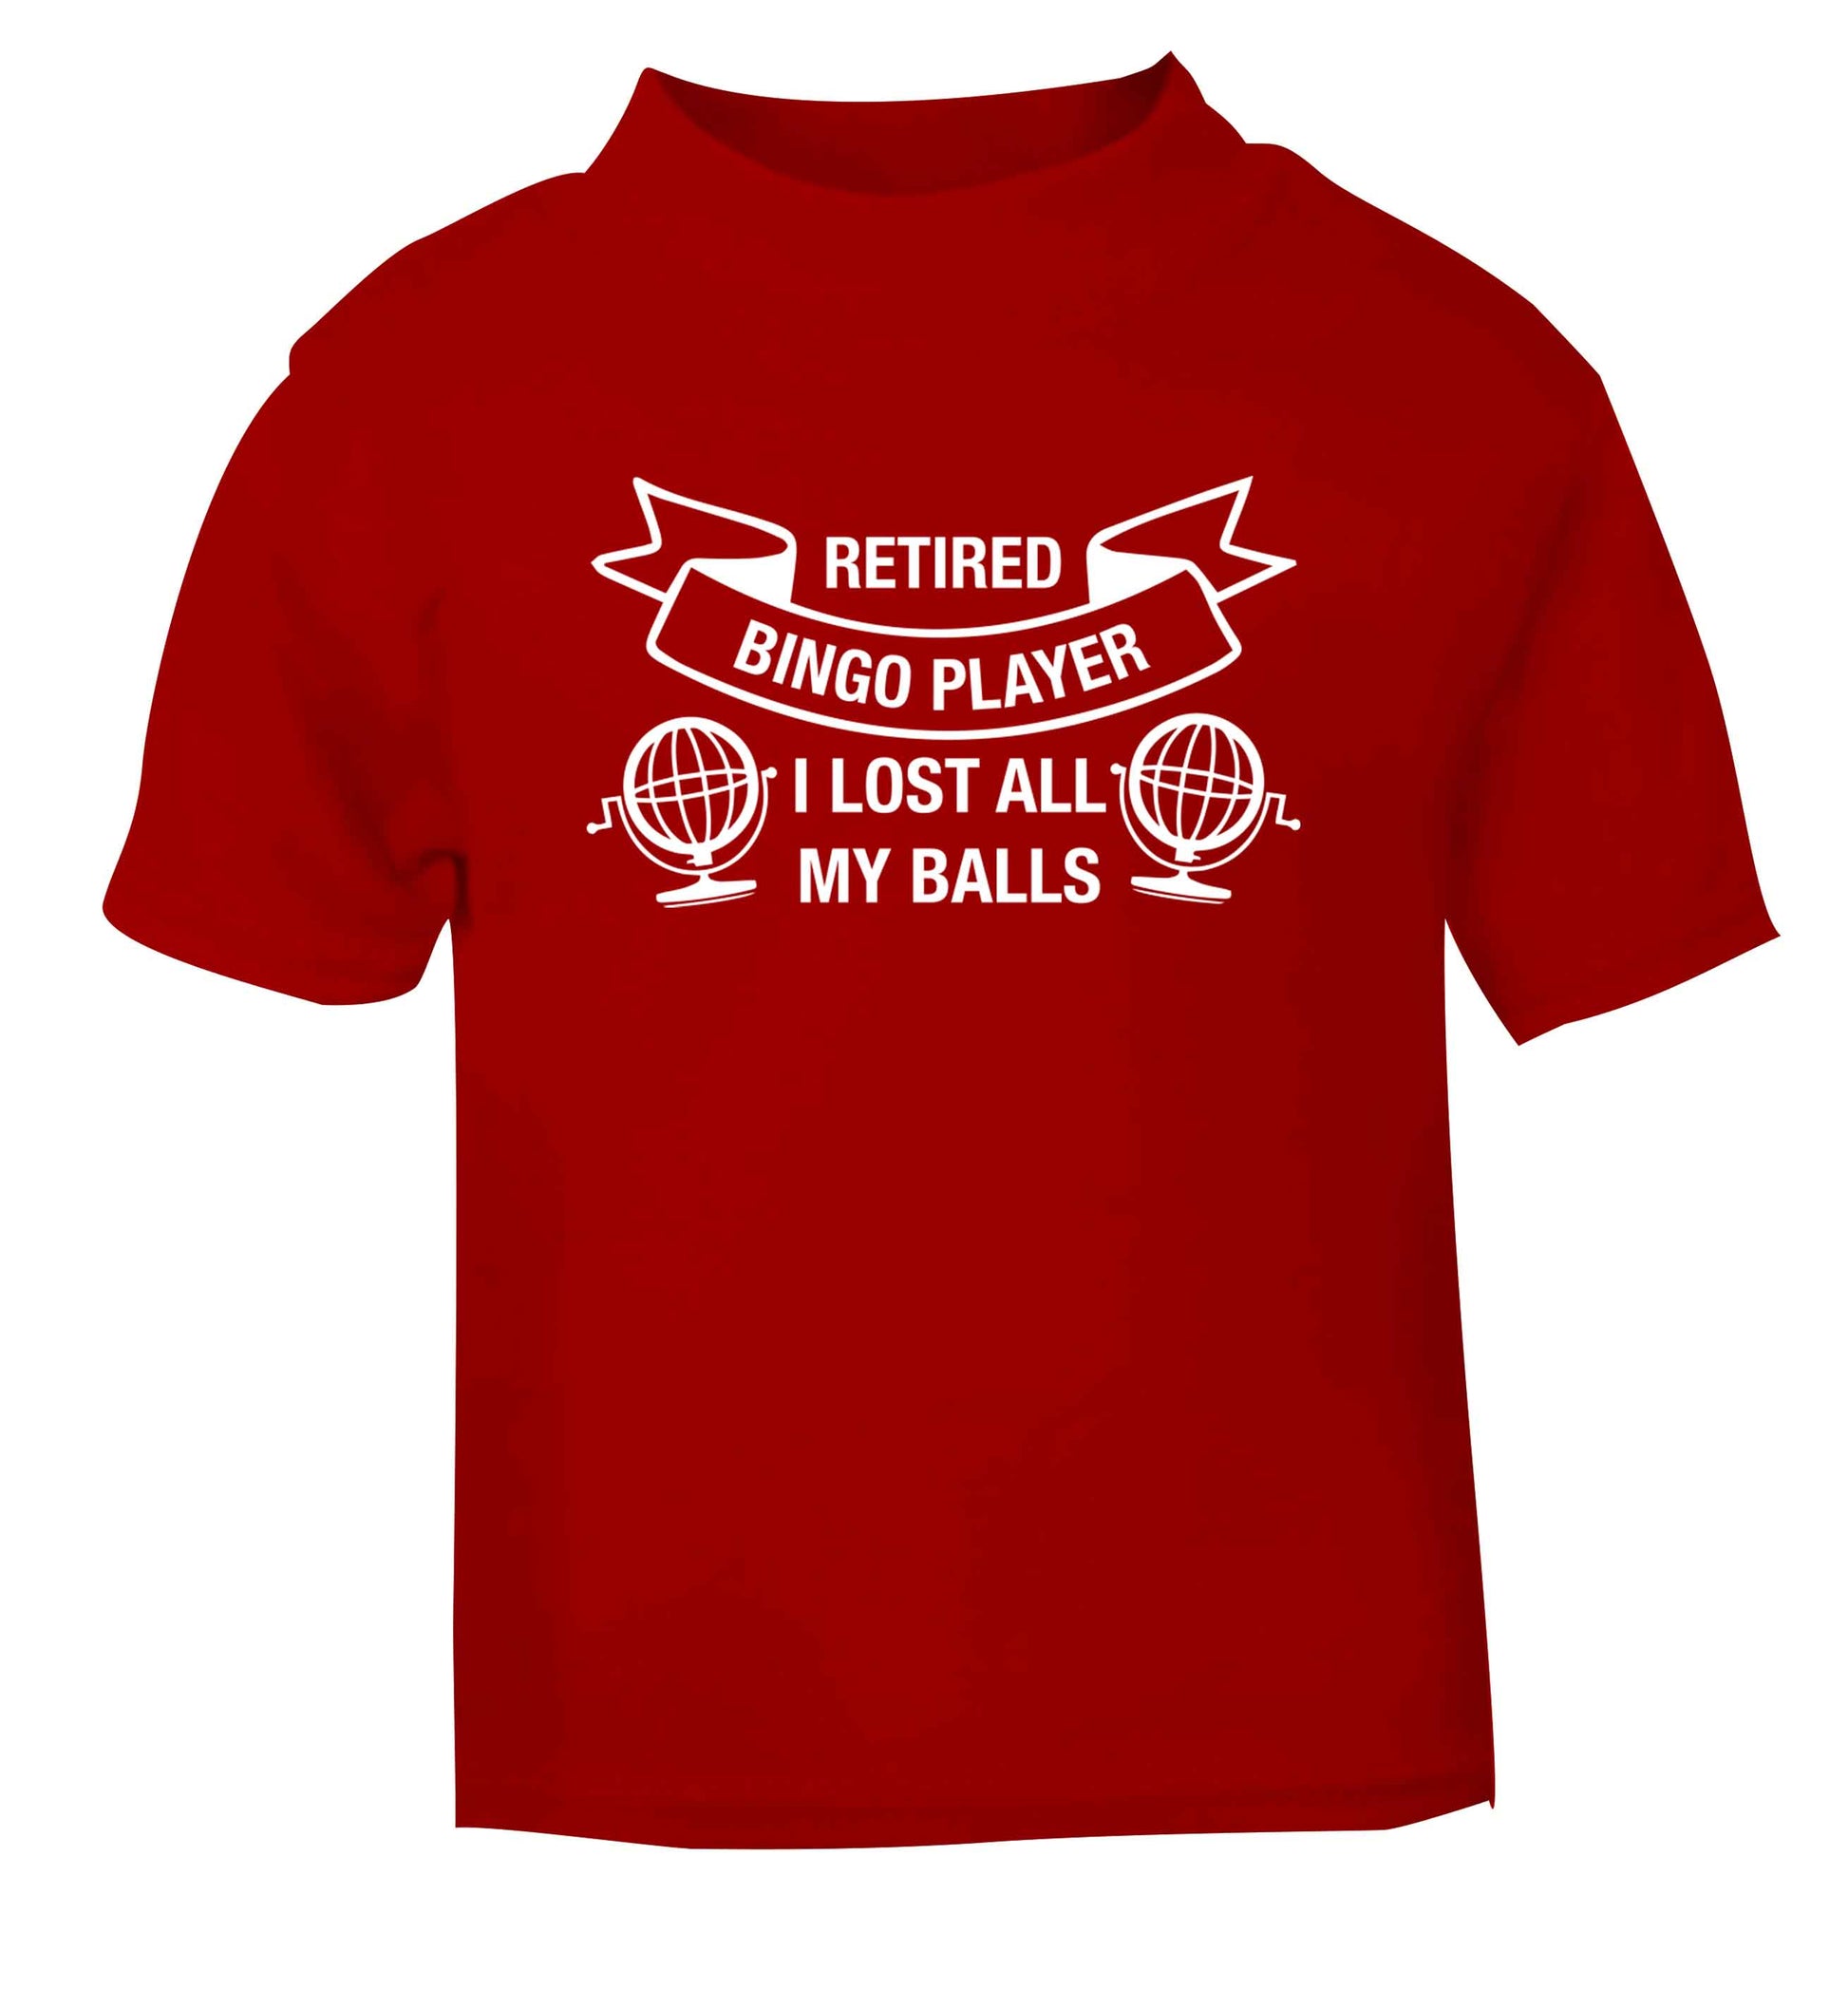 Retired bingo player I lost all my balls red Baby Toddler Tshirt 2 Years